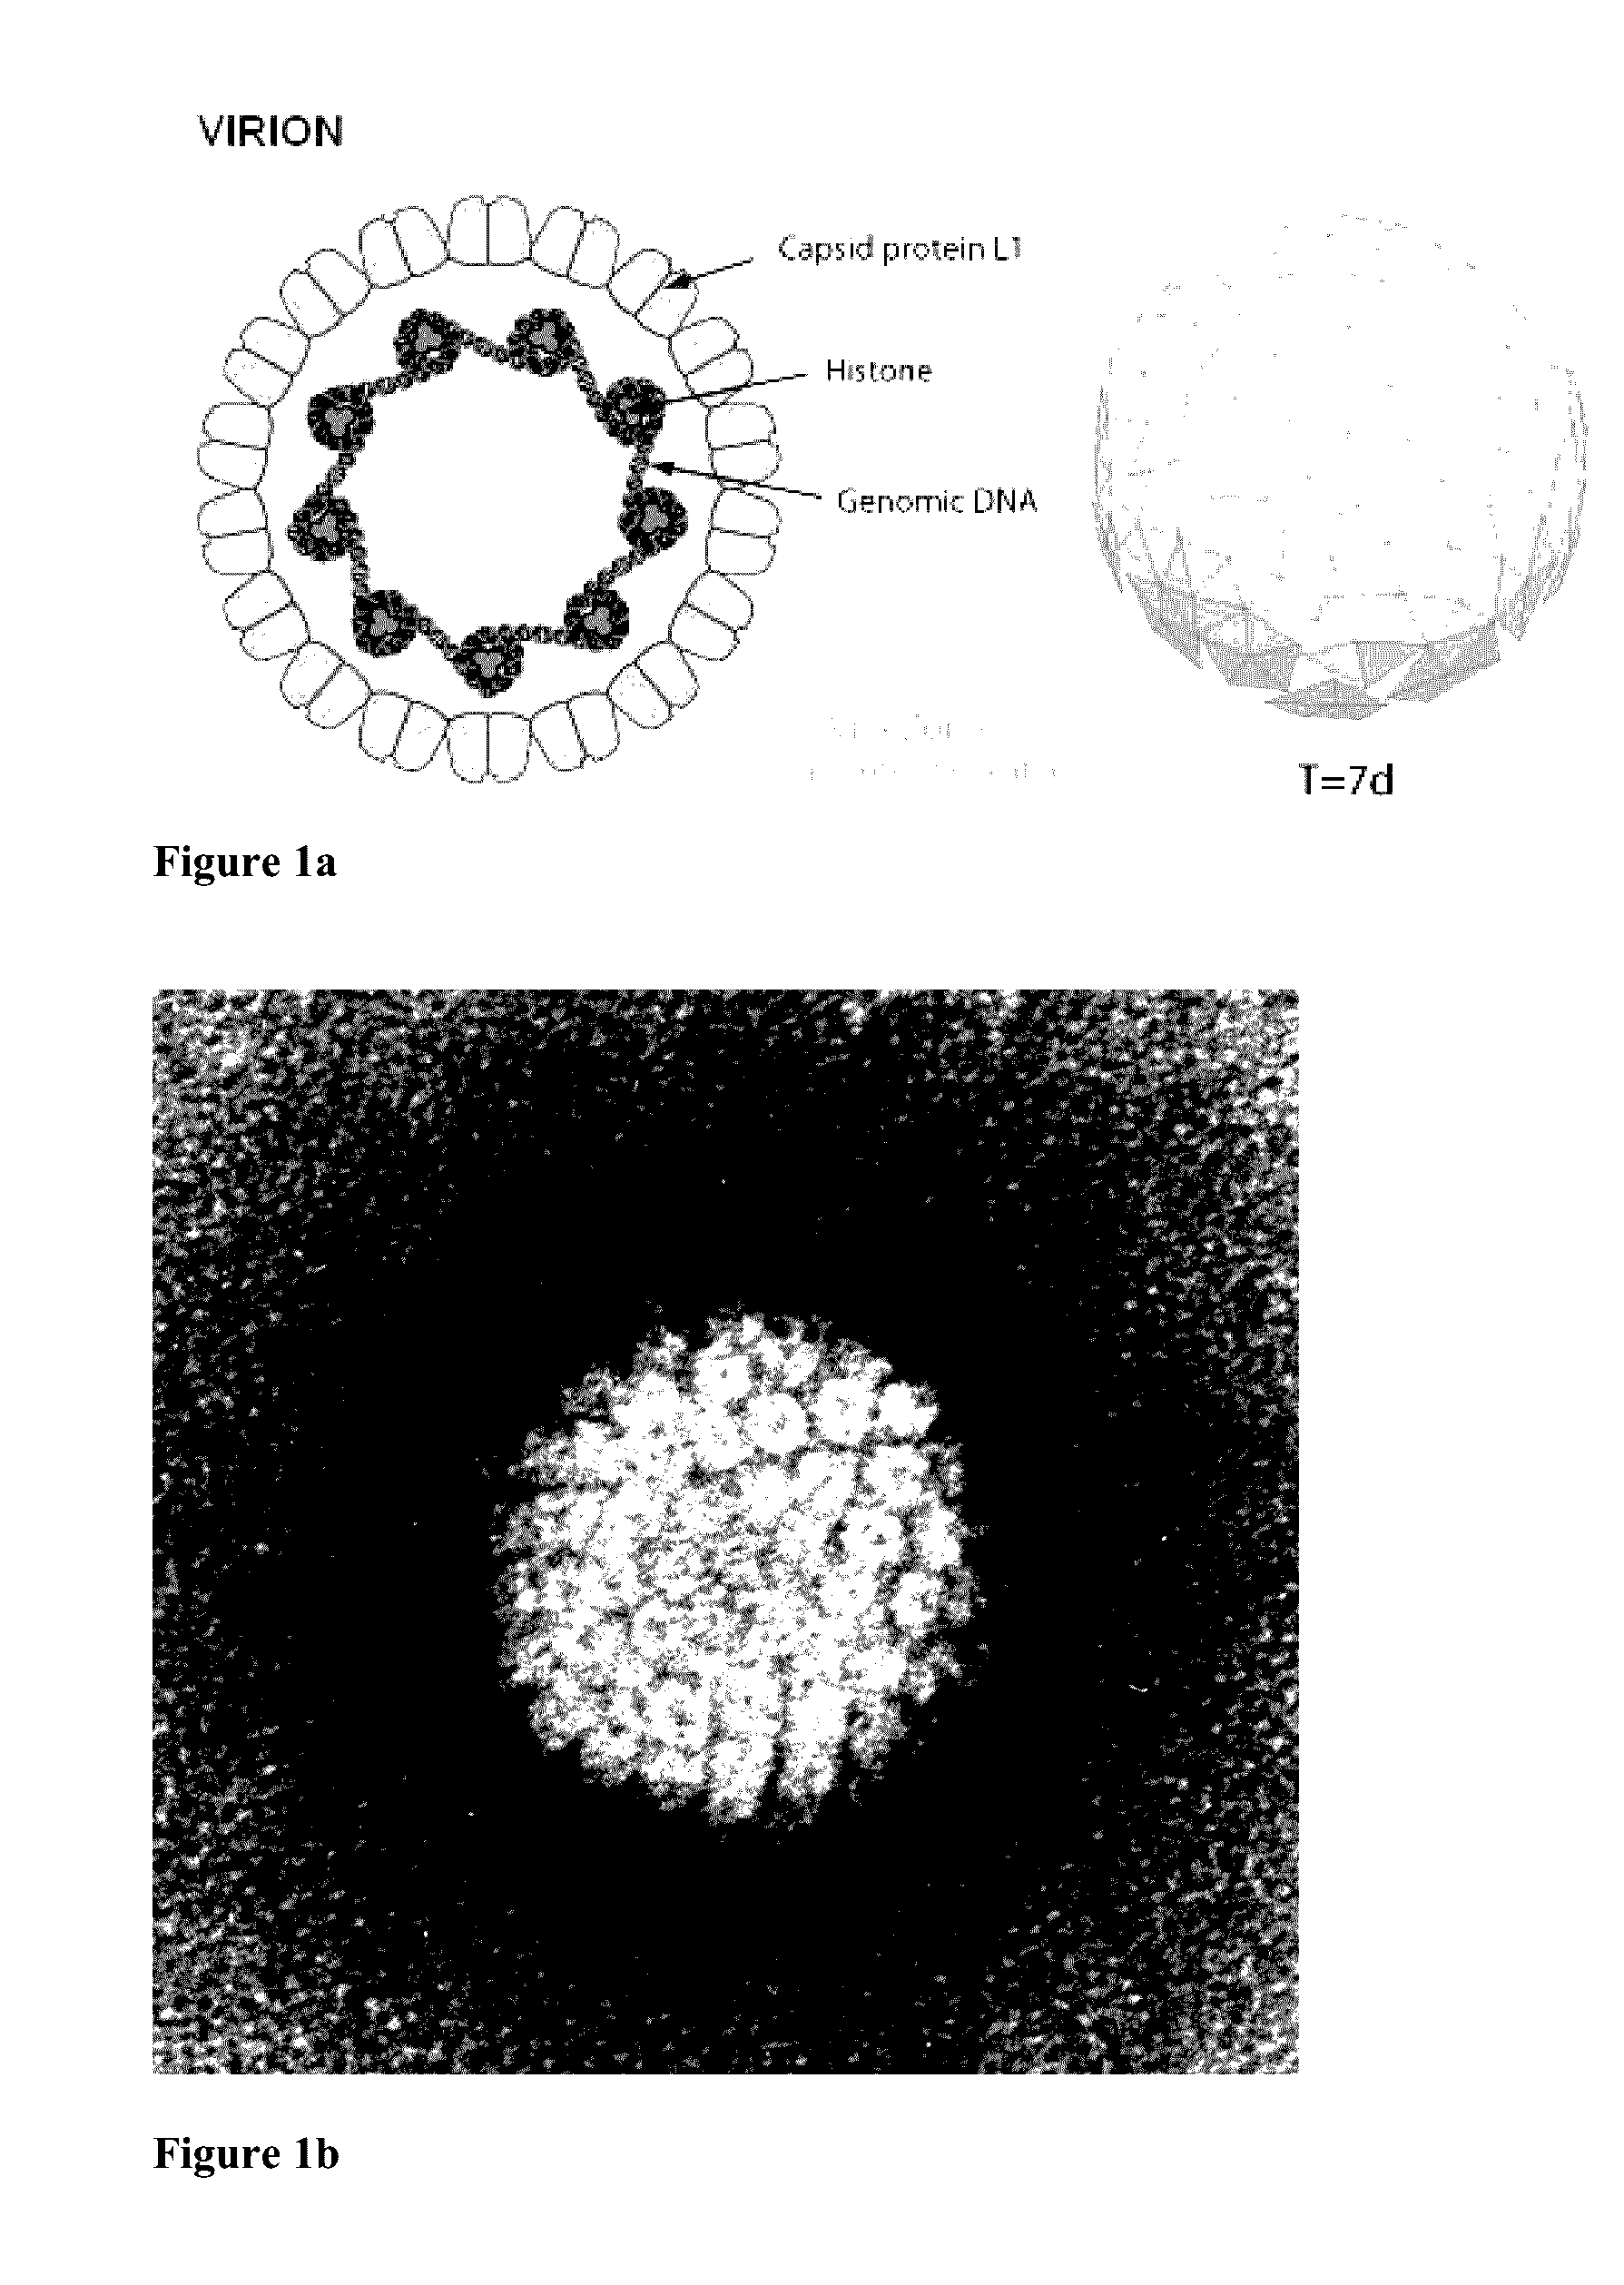 Method for diagnosing, quantifying, treating, monitoring or evaluating conditions, diseases or disorders associated with human papilloma virus (HPV) infection